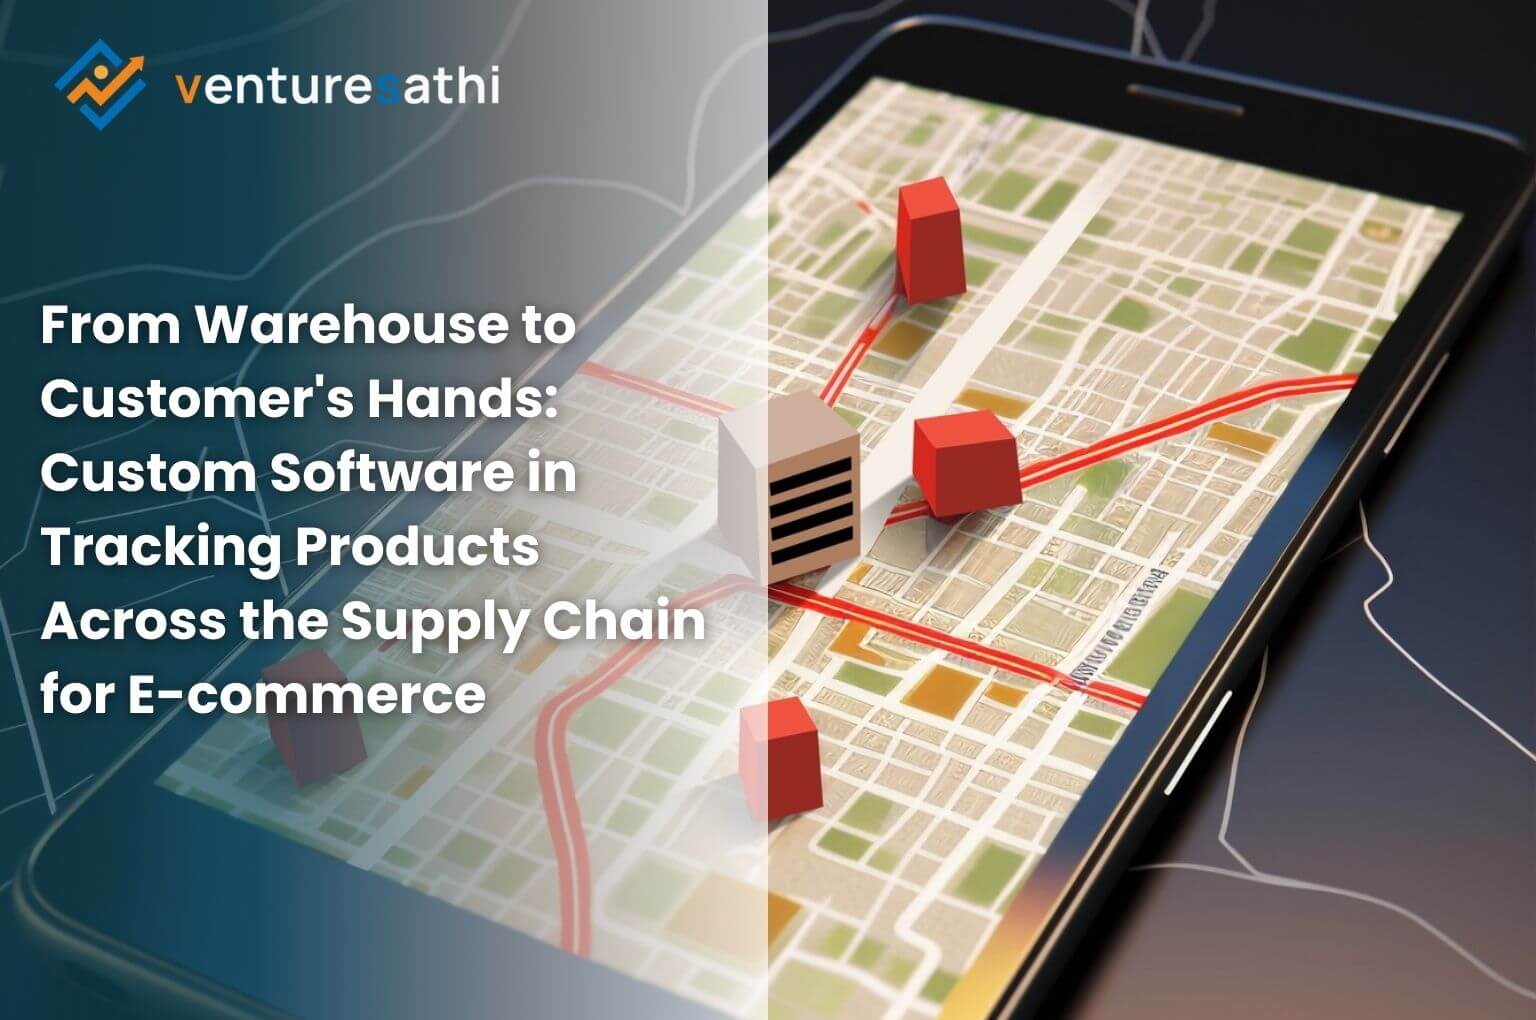 From Warehouse to Customer's Hands: The Role of Custom Software in Tracking Products Across the Supply Chain for E-commerce